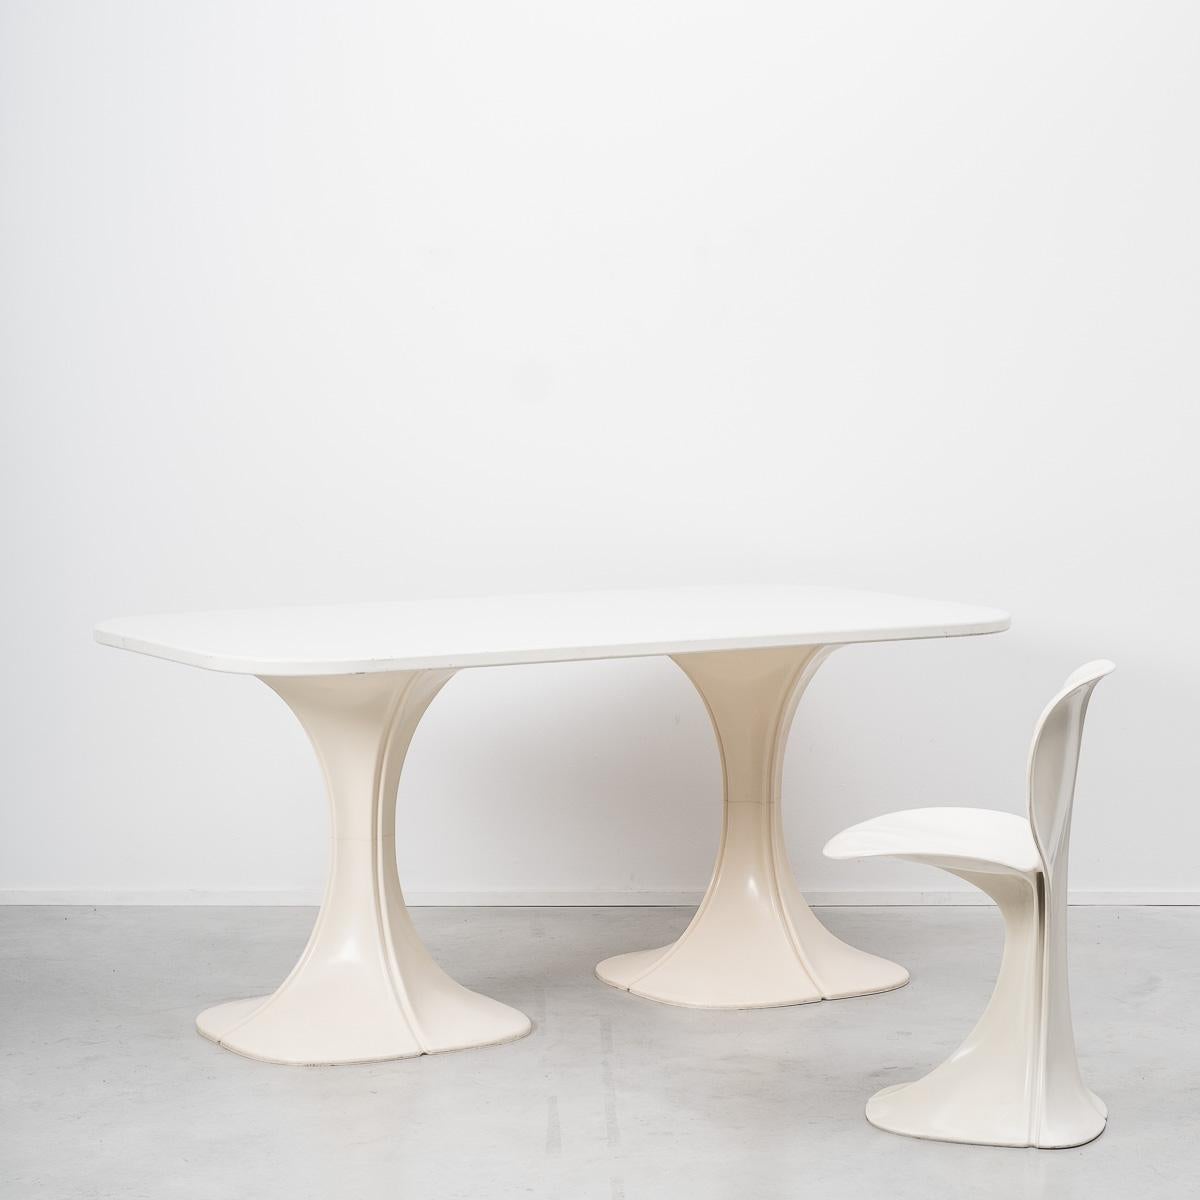 Pierre Paulin’s collaboration with the Belgium manufacturers Boro produced a stunning example of early plastic furniture. The organic design of the 8810 Flower chair in 1972 was created from white ABS plastic and was originally intended for outdoor